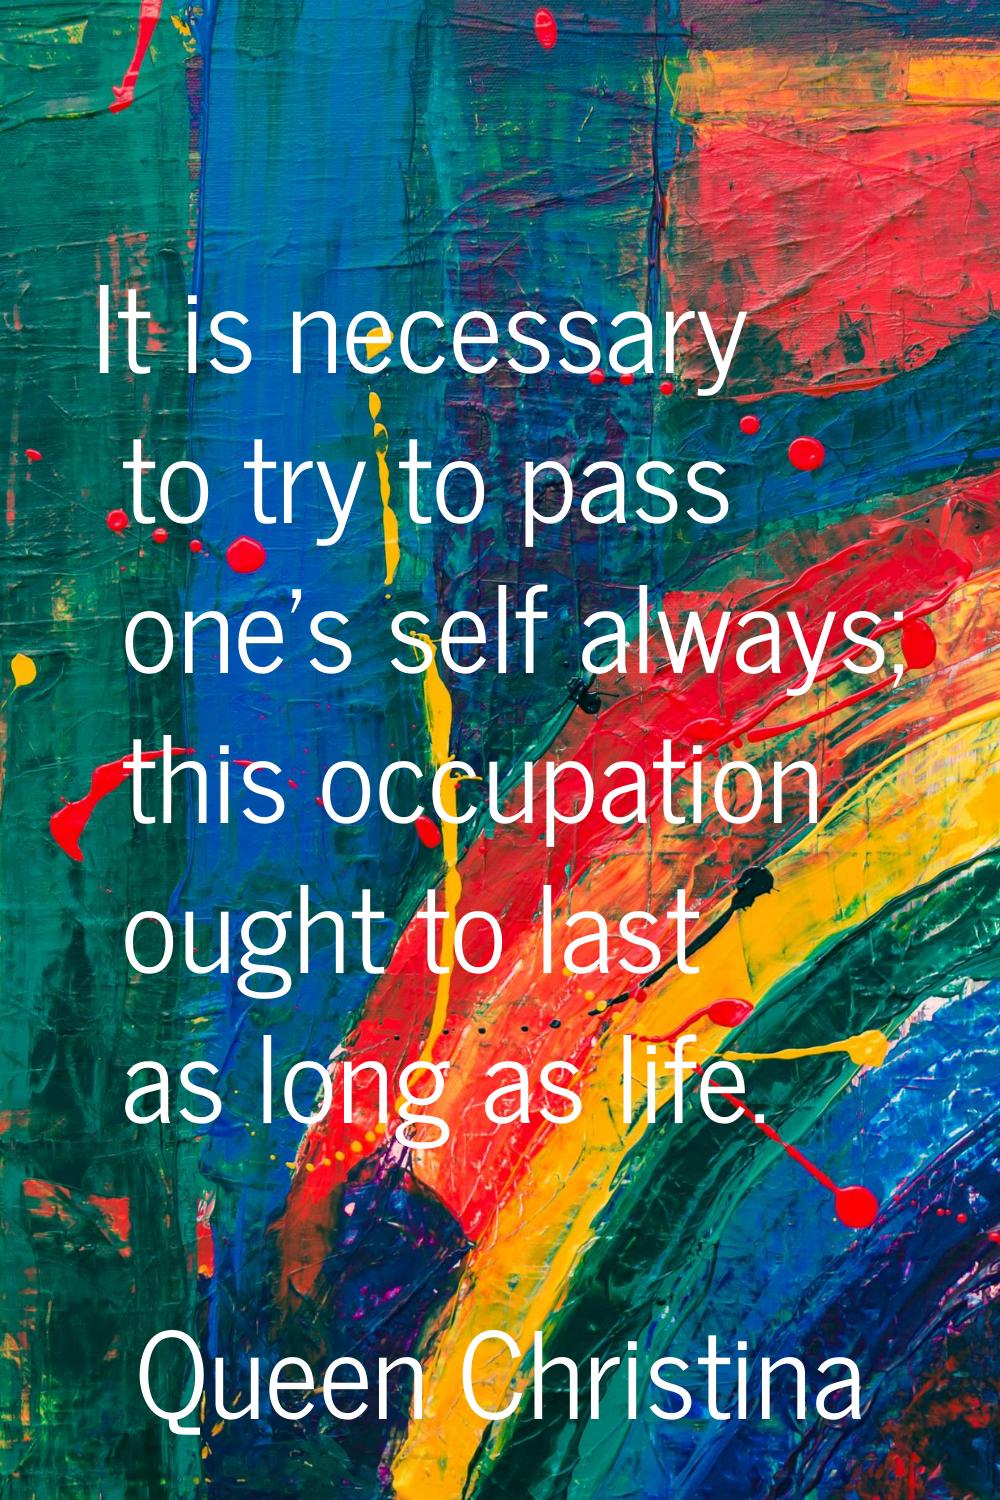 It is necessary to try to pass one's self always; this occupation ought to last as long as life.